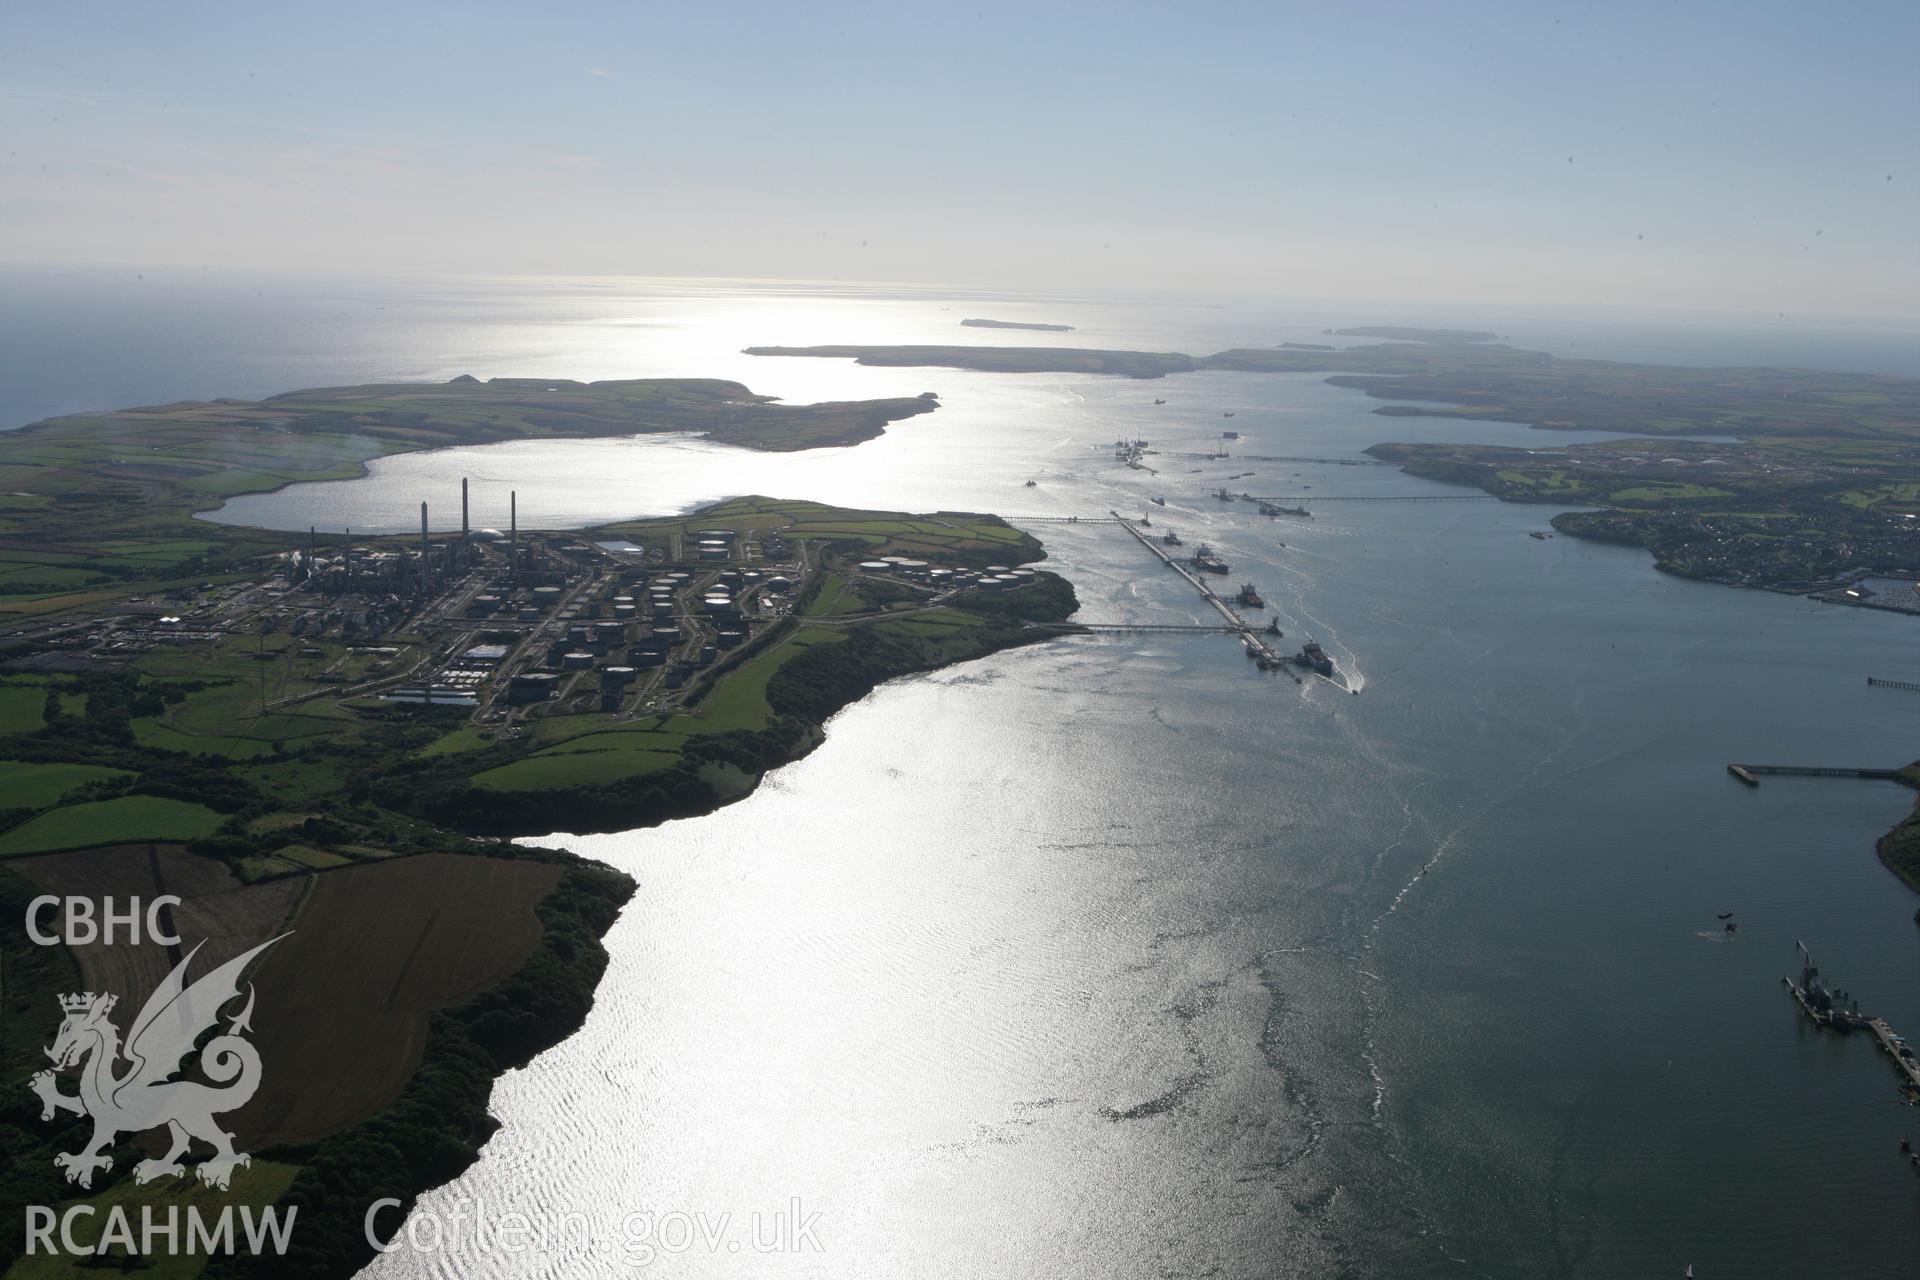 RCAHMW colour oblique aerial photograph of Milford Haven Waterway, looking to the west. Taken on 30 July 2007 by Toby Driver